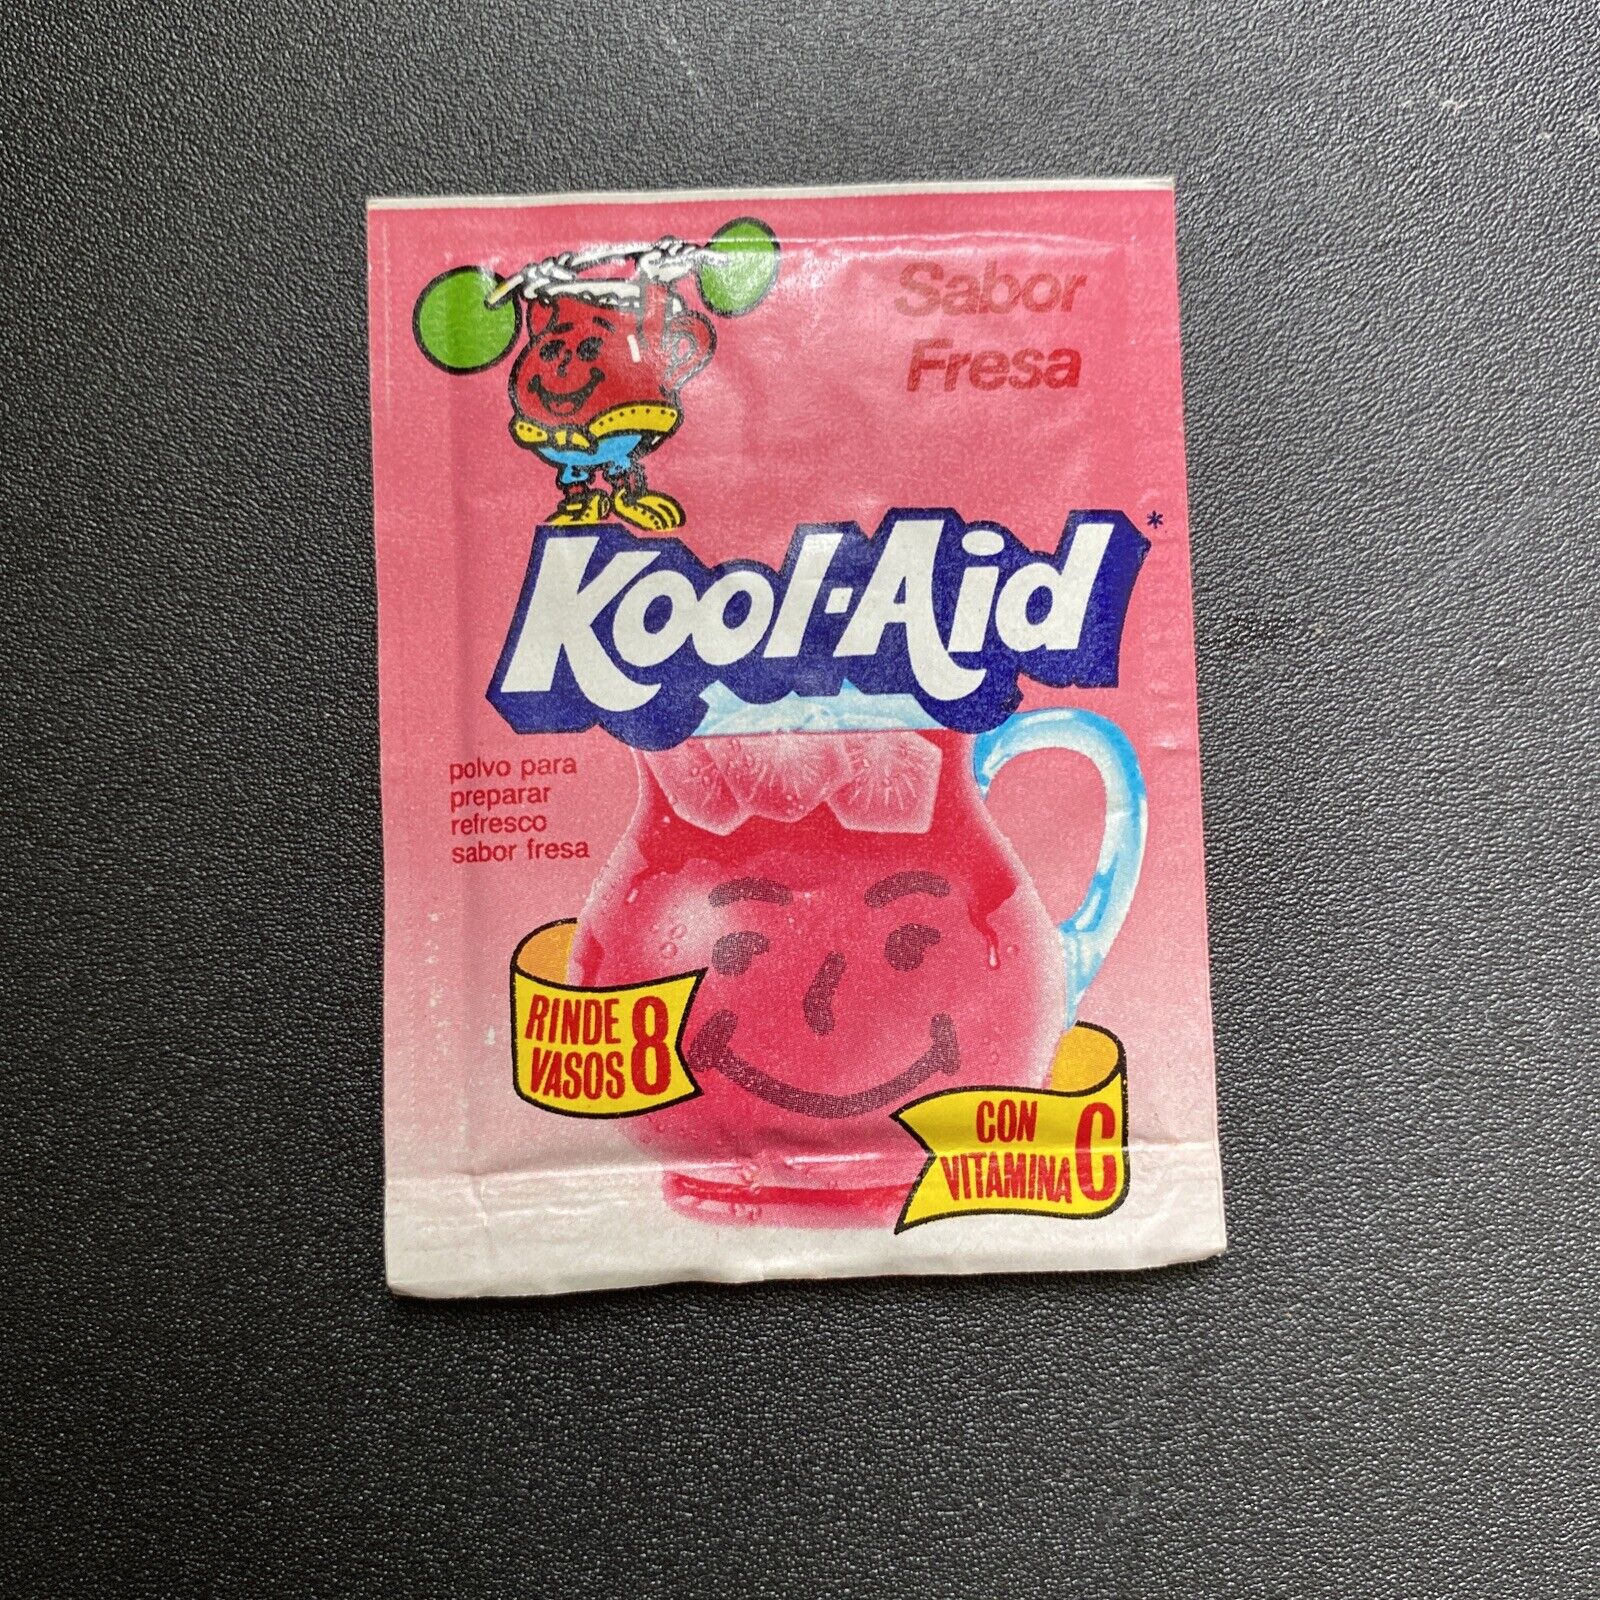 Extremely Rare Kool Aid Packet Mexico Vintage Strawberry Flavor